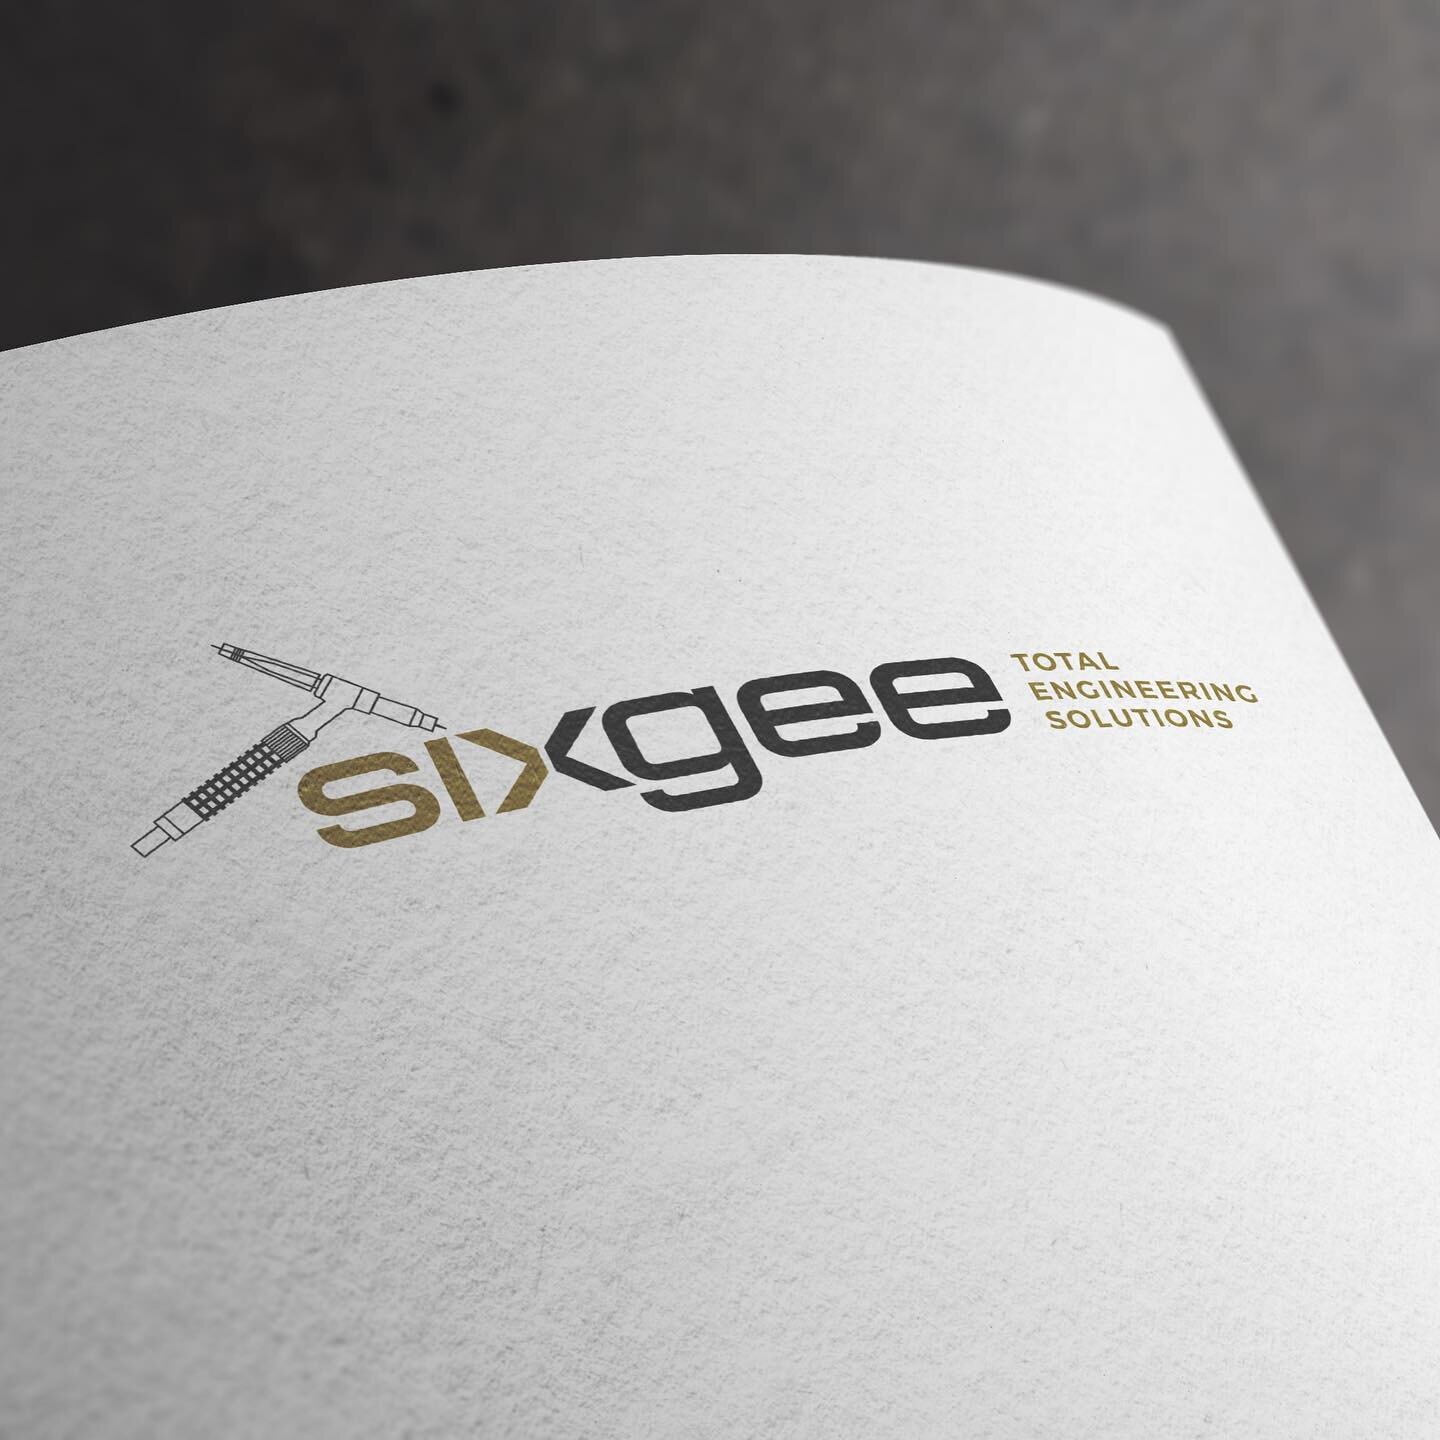 Modern &amp; fresh new brand for Sixgee Total Engineering 🖤